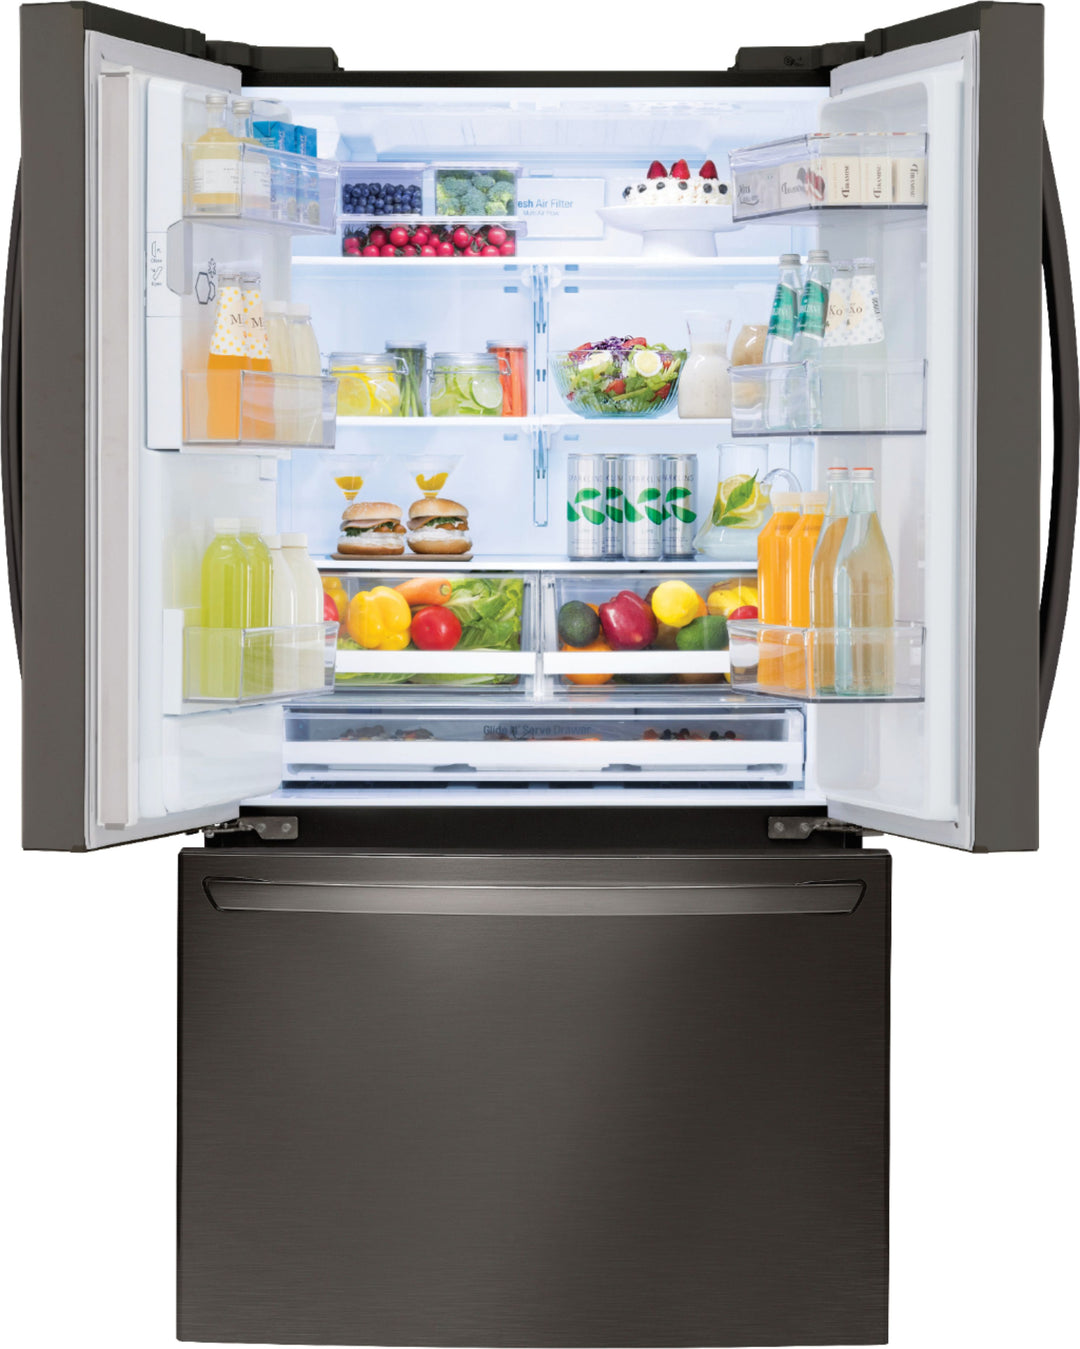 LG - 26.2 Cu. Ft. French Door Smart Refrigerator with Dual Ice Maker - Black stainless steel_23